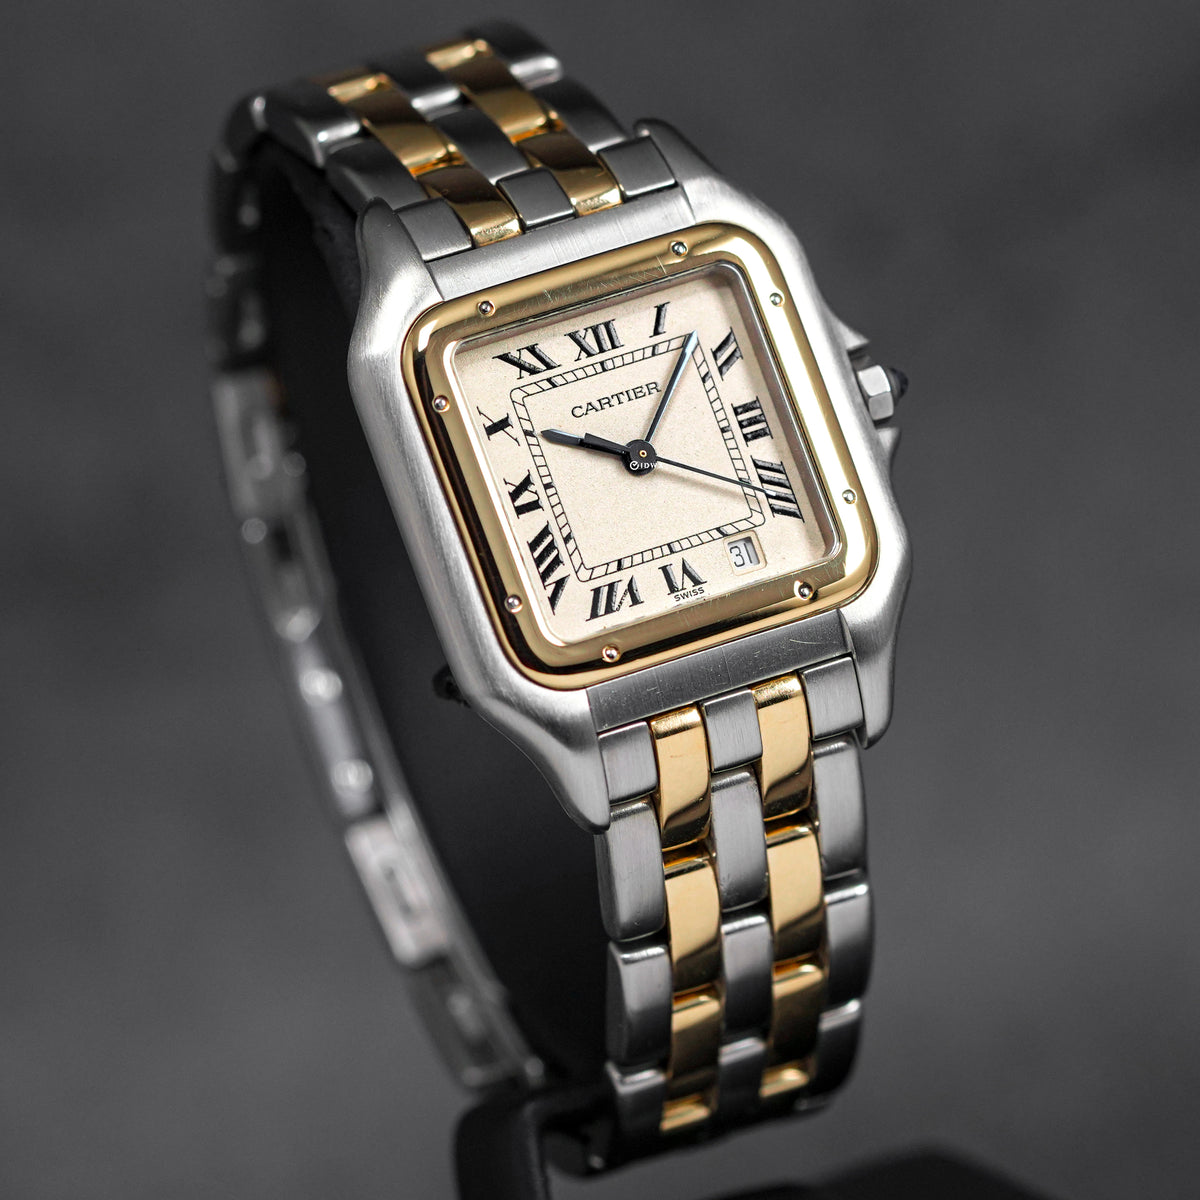 PANTHERE TWOTONE YELLOWGOLD M WHITE DIAL QUARTZ (WATCH ONLY)